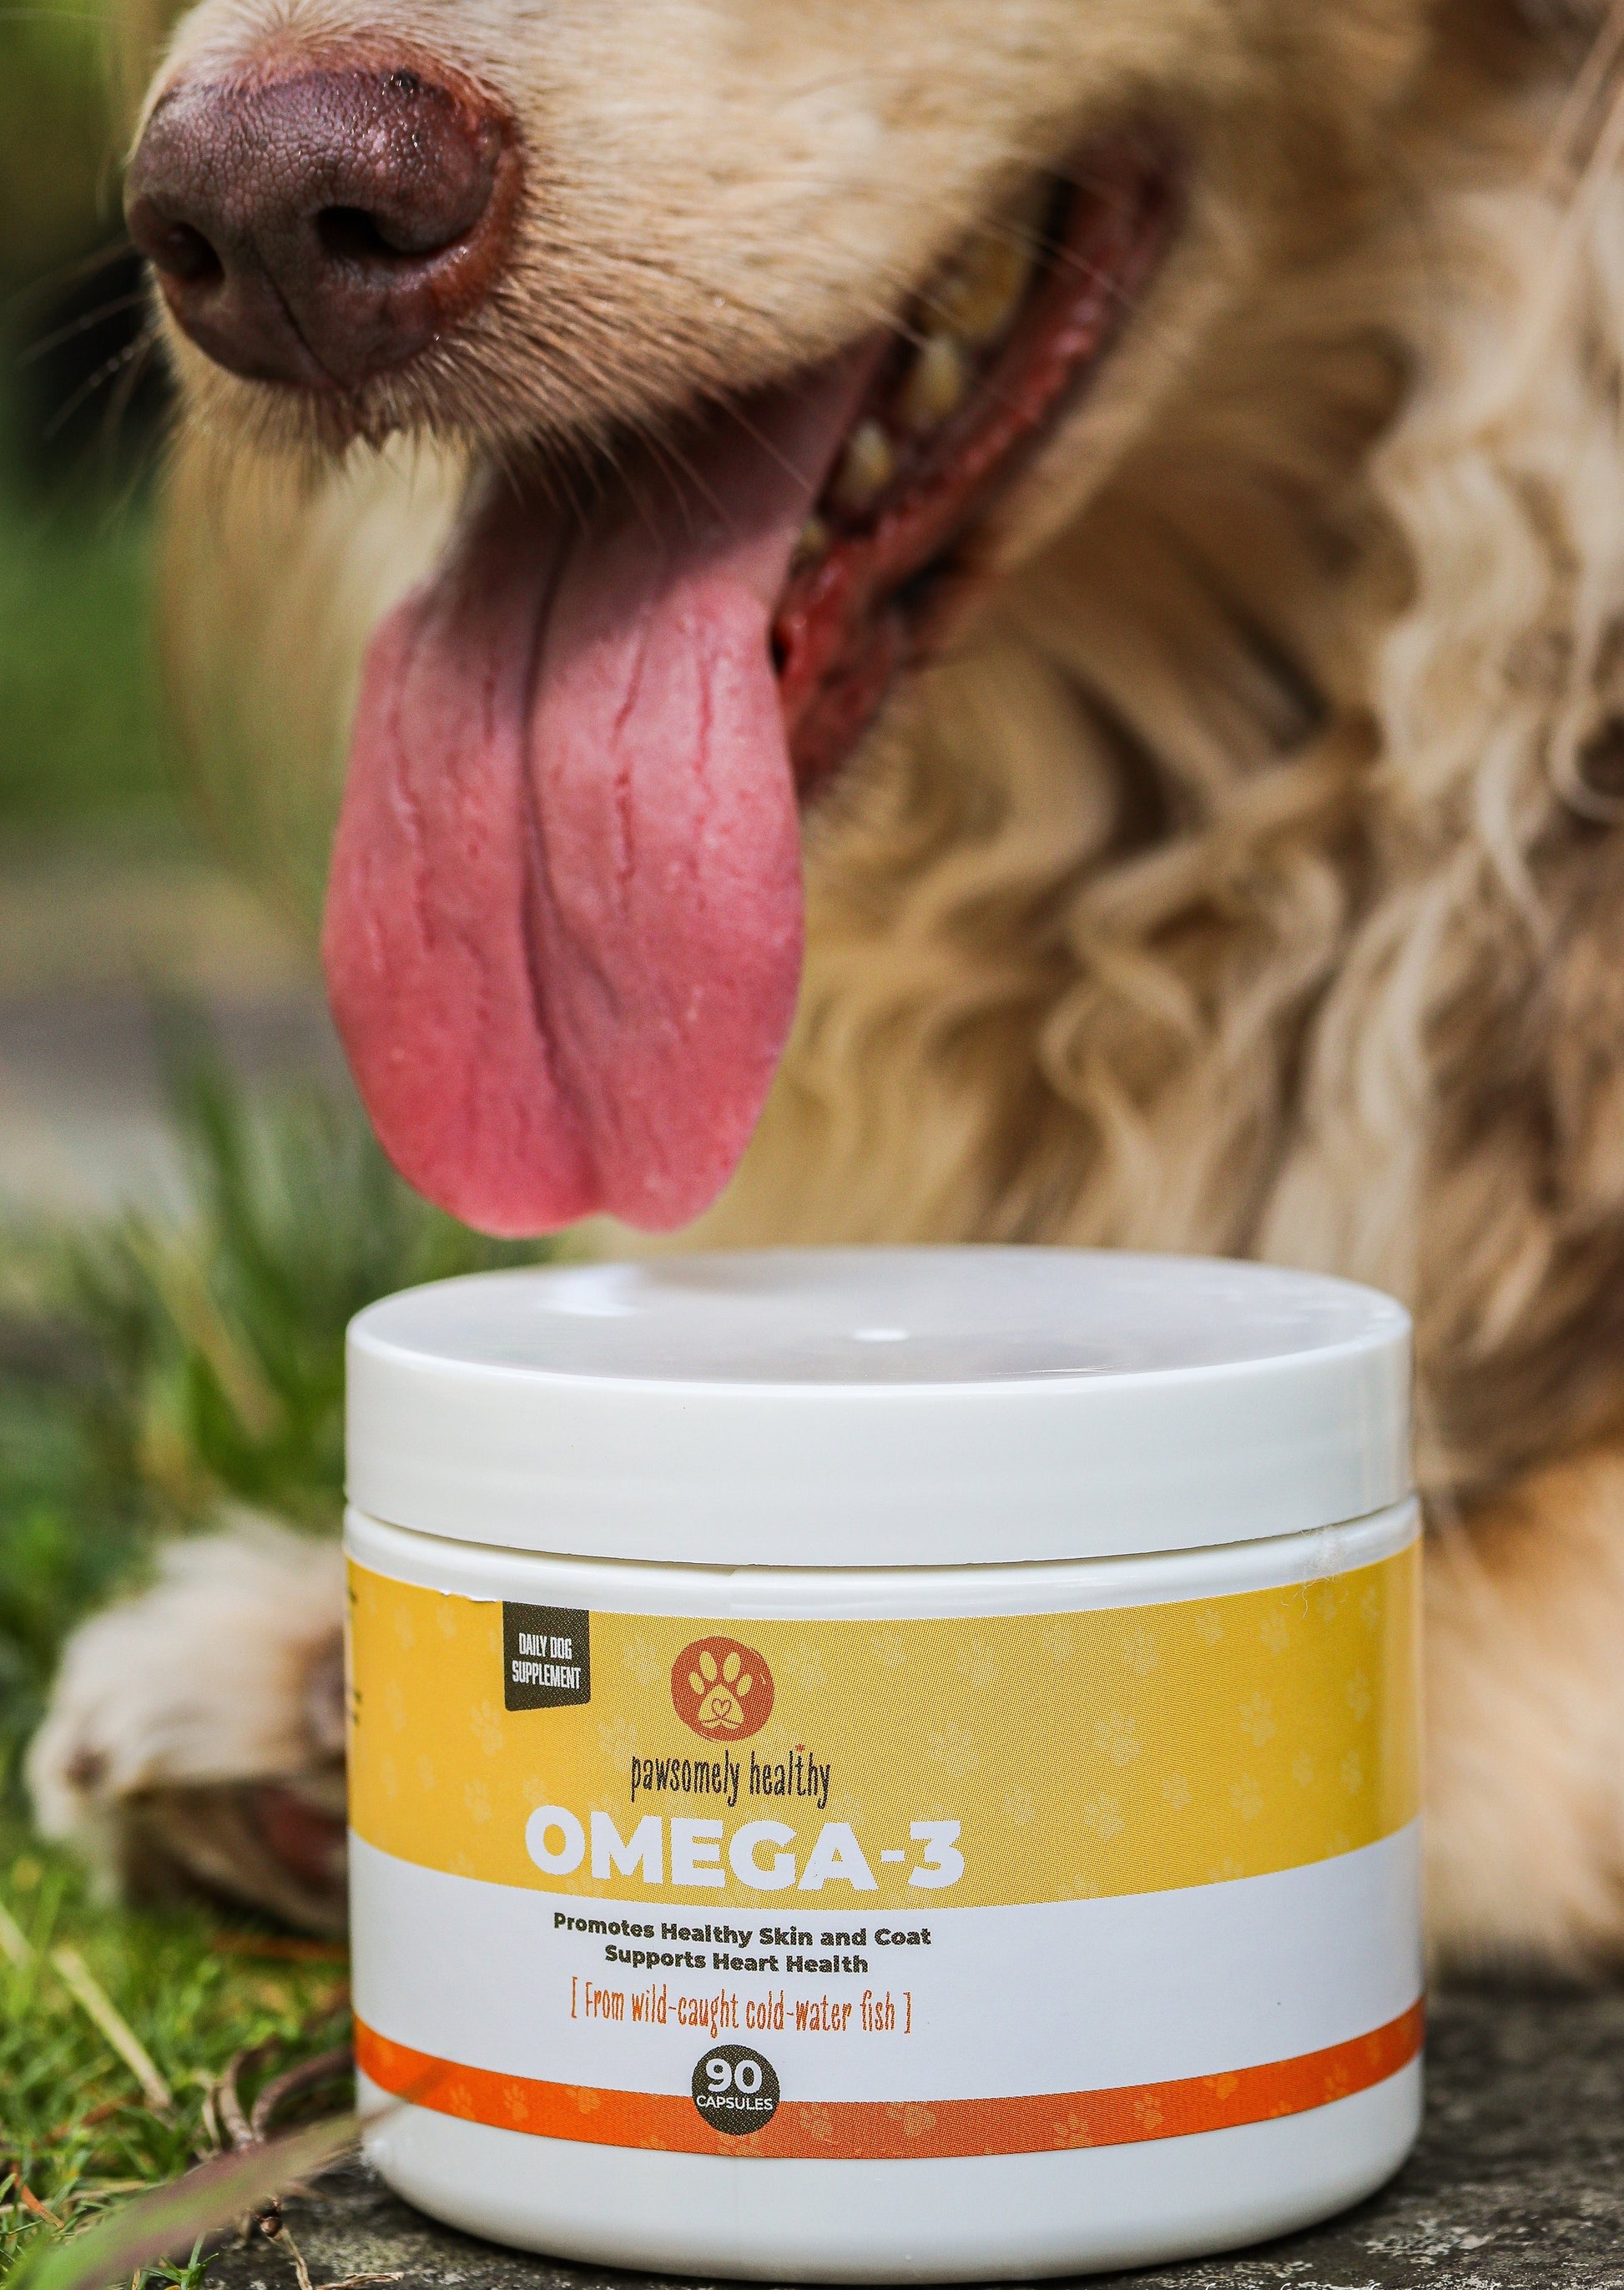 Dog's happy face next to Pawsomely Healthy omega-3 fish oil supplement jar 